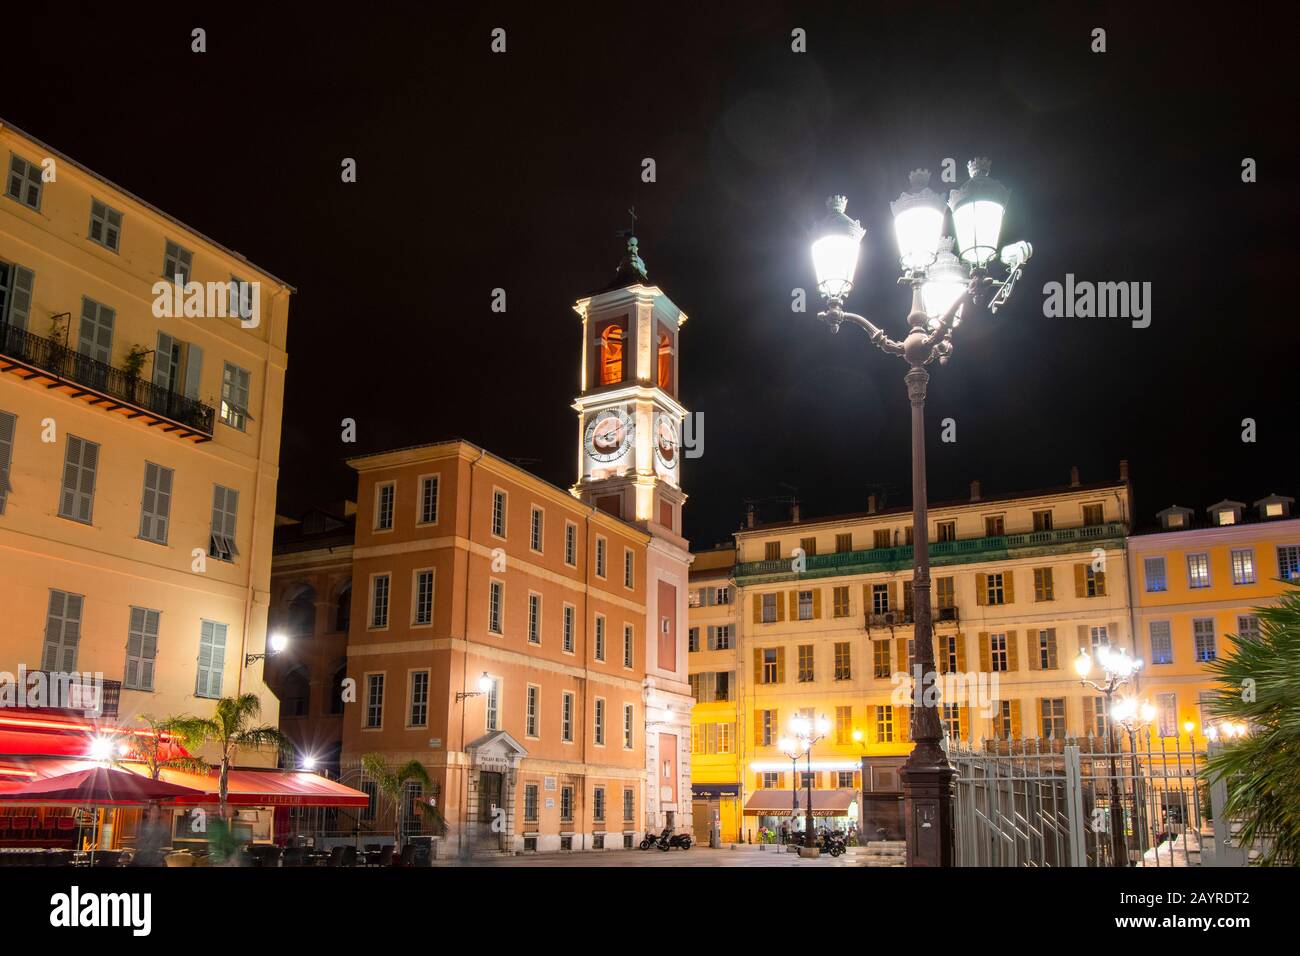 Late night view of Rusca Palace, bell clock tower and cafes in the Old Town Vieux Nice of Nice, France, on the French Riviera. Stock Photo